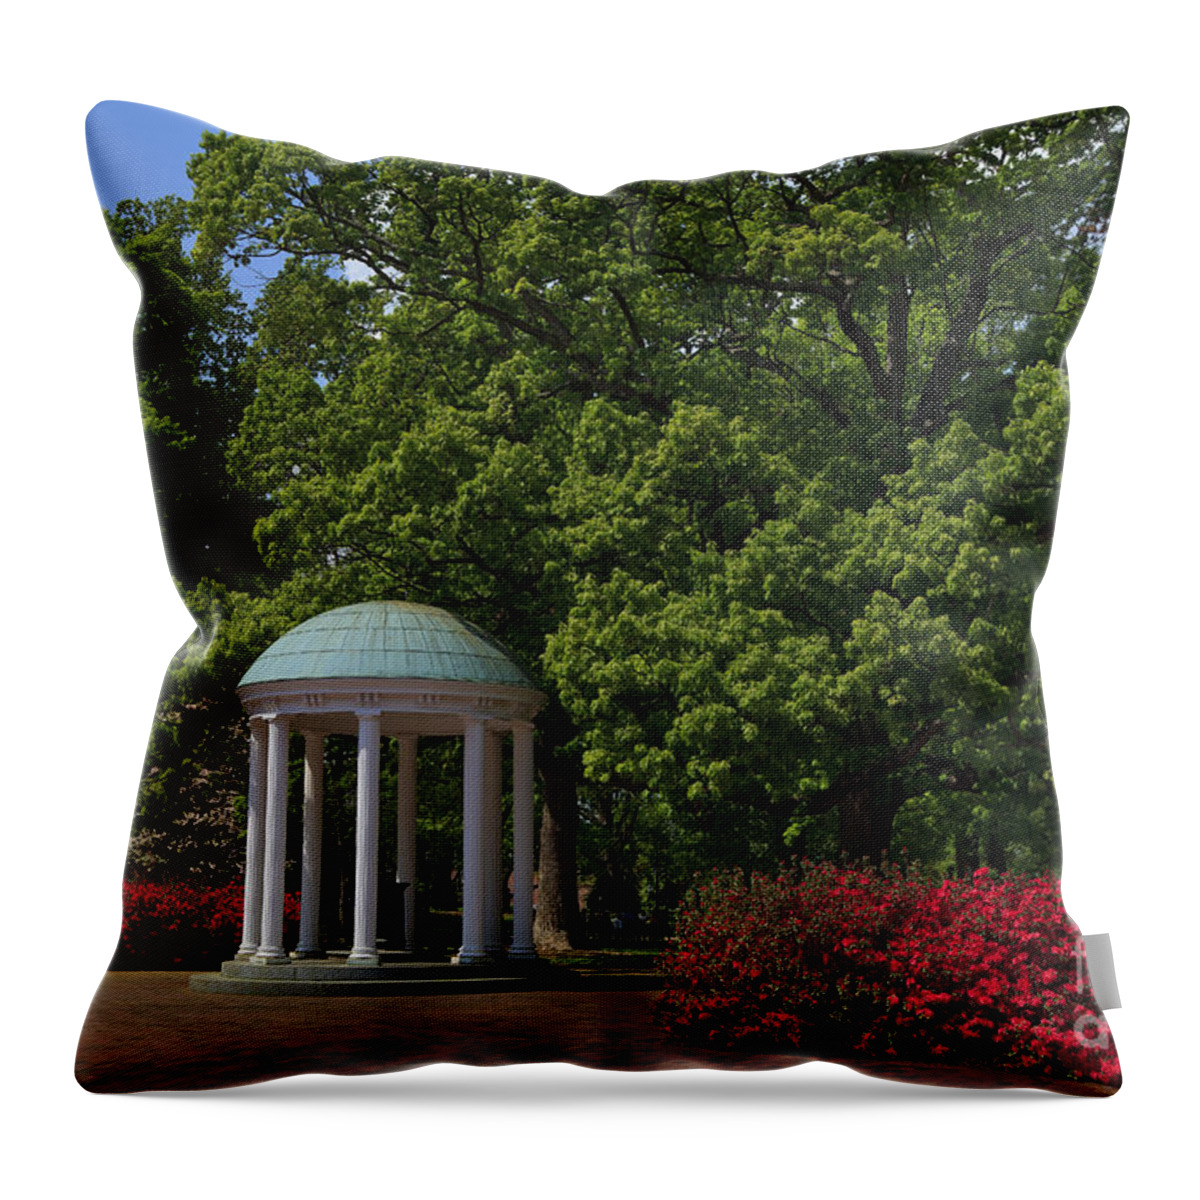 The Throw Pillow featuring the photograph Chapel Hill Old Well by Jill Lang